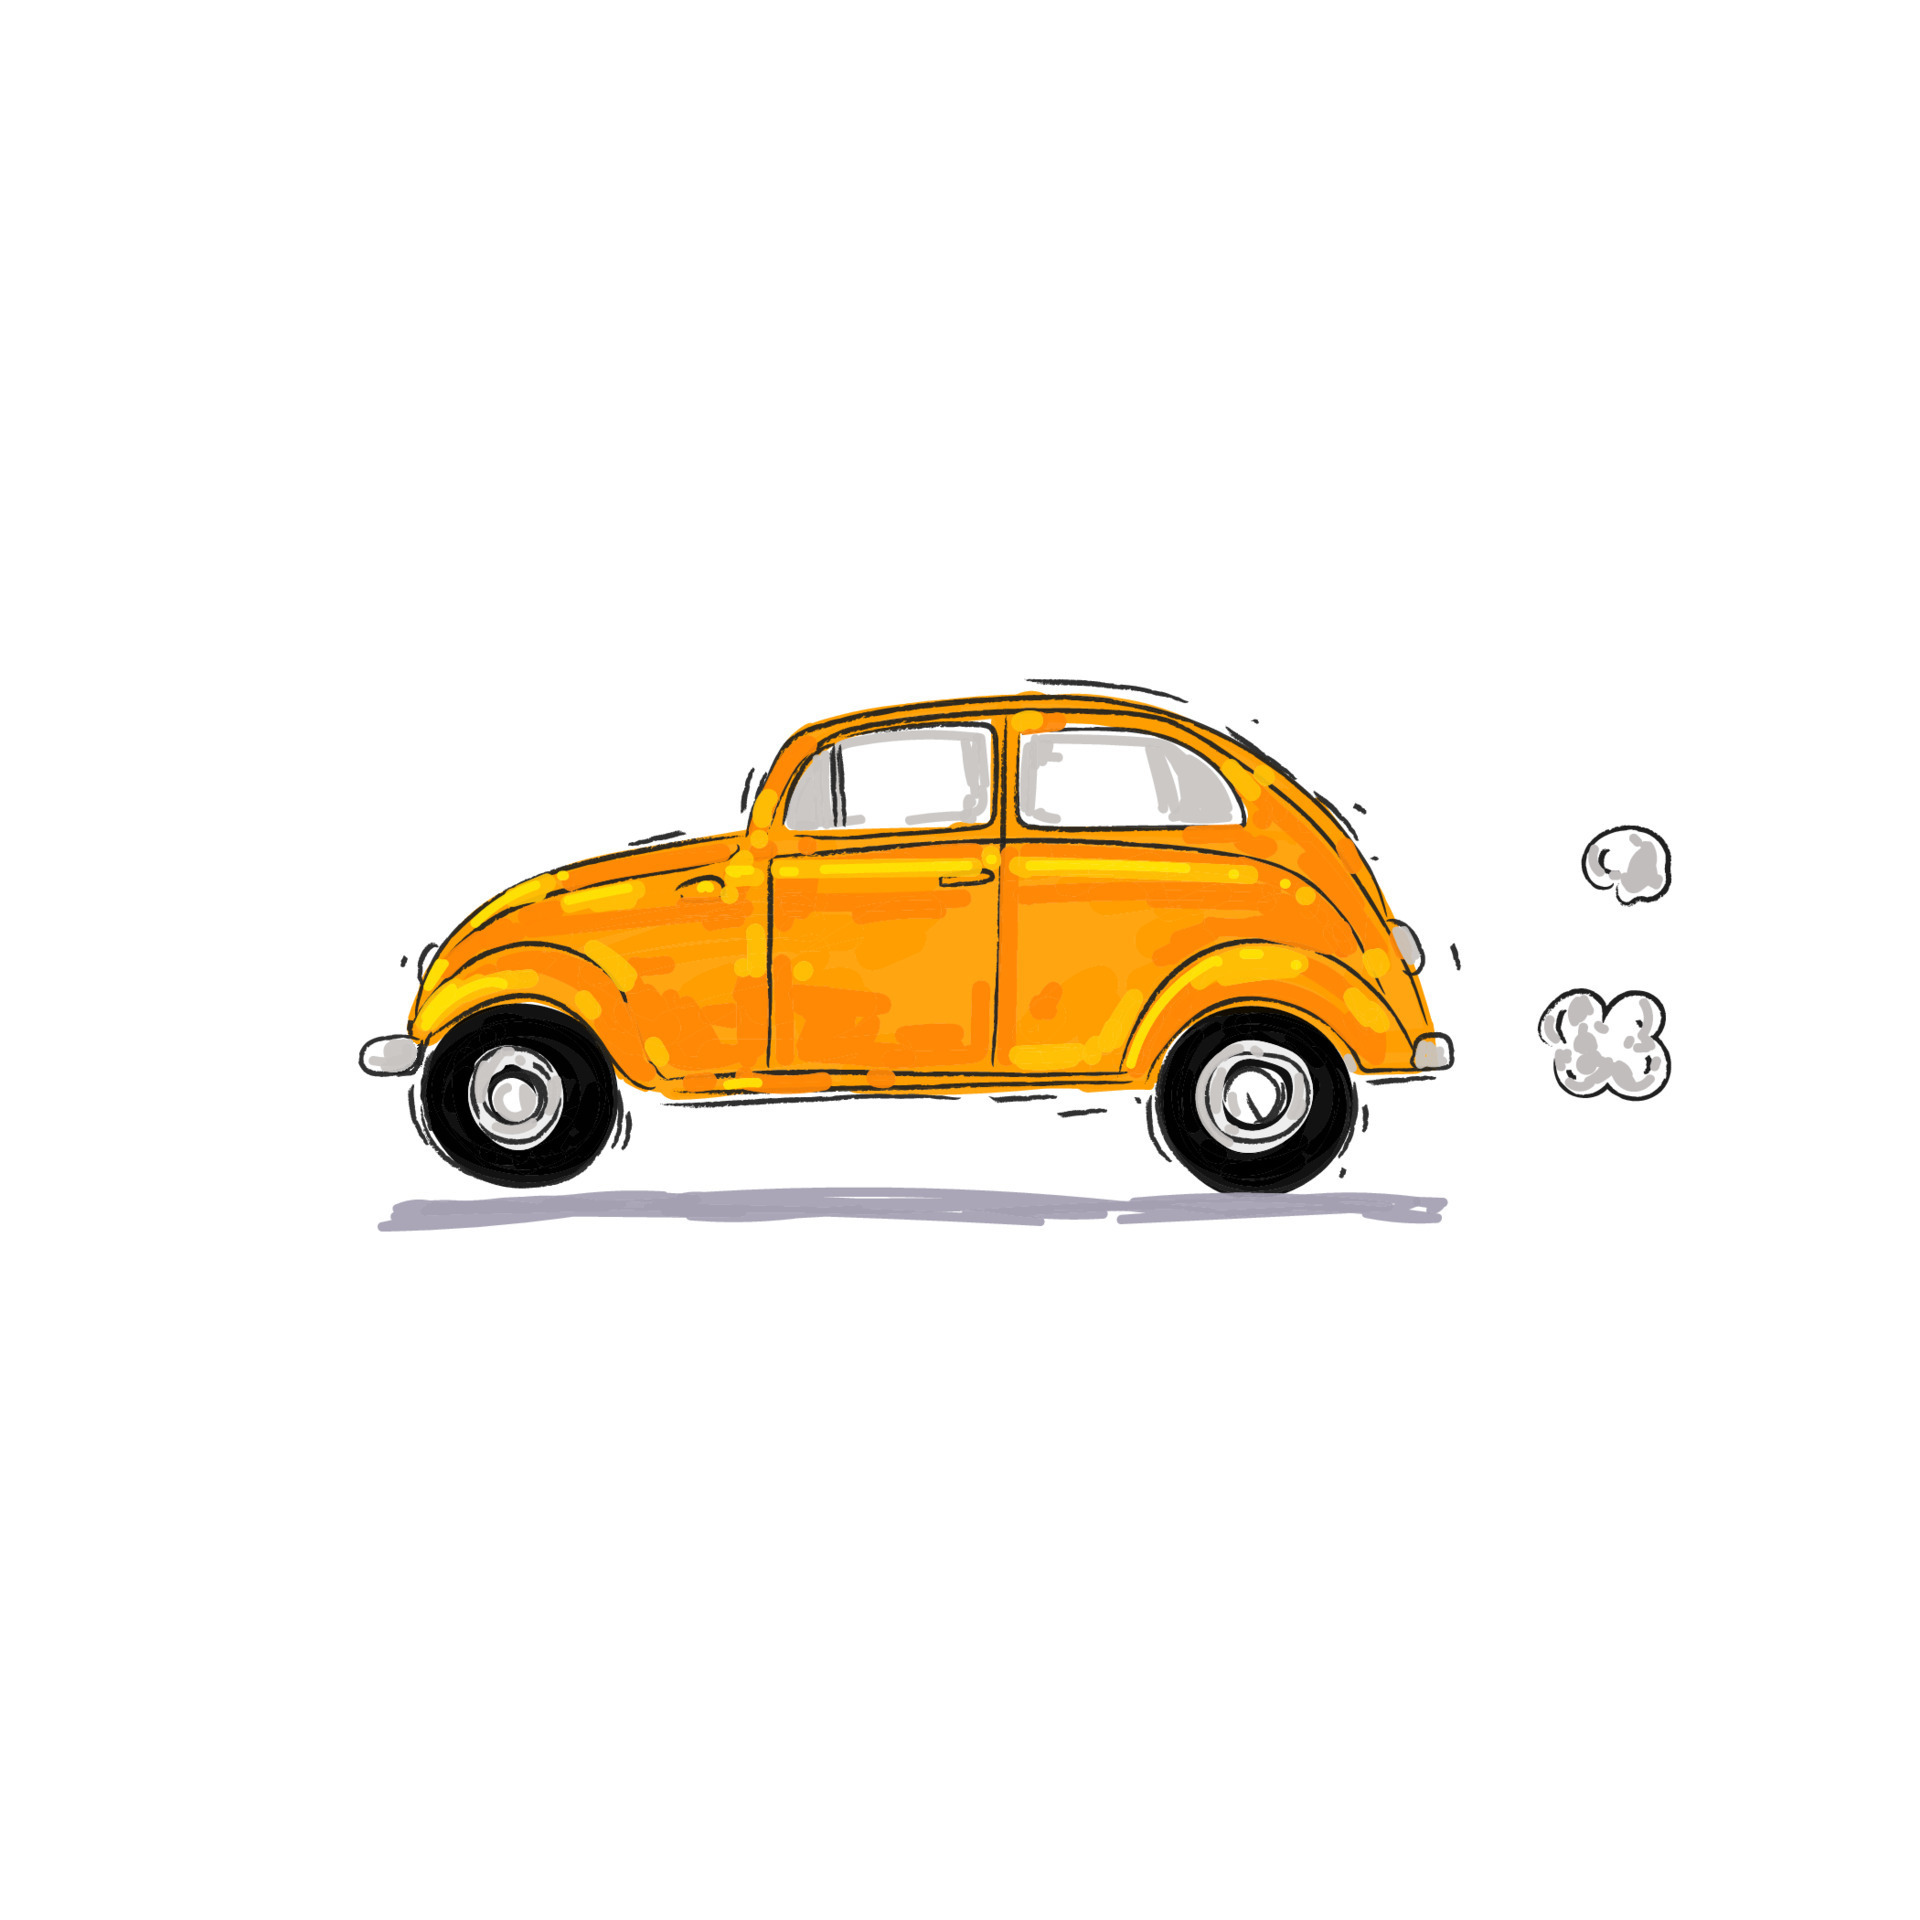 Cartoon Beetle Car Vector Images over 100